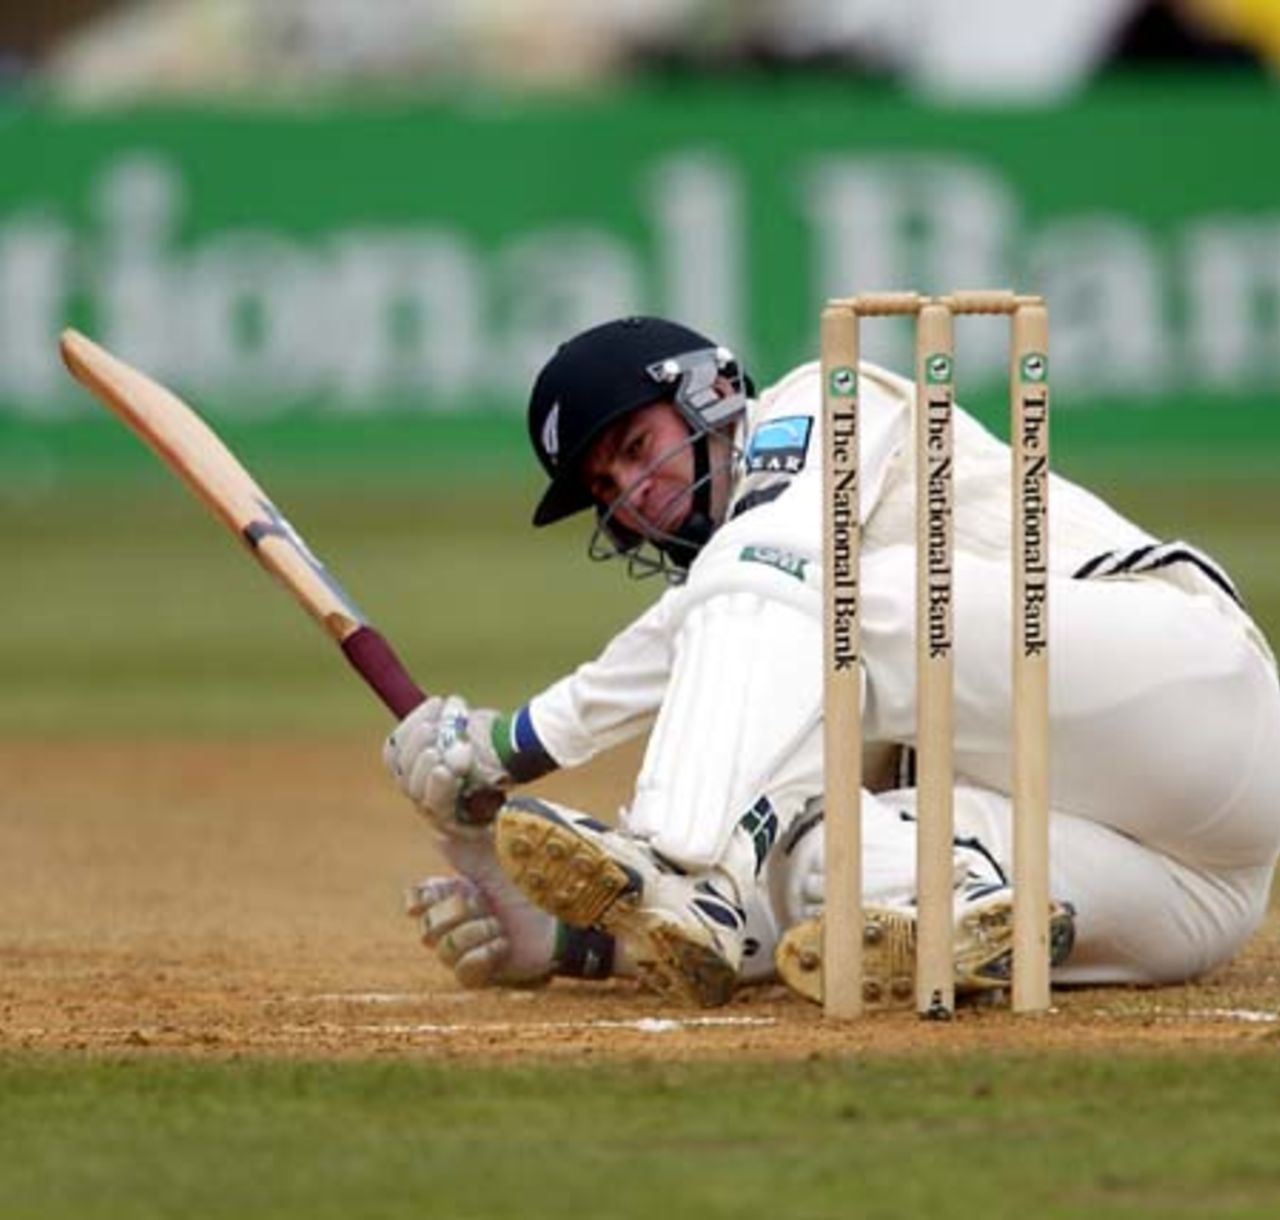 New Zealand batsman Matt Horne falls over after being struck on the pads by a delivery from England bowler Andy Caddick during his second innings of 38. 2nd Test: New Zealand v England at Basin Reserve, Wellington, 21-25 March 2002 (25 March 2002).